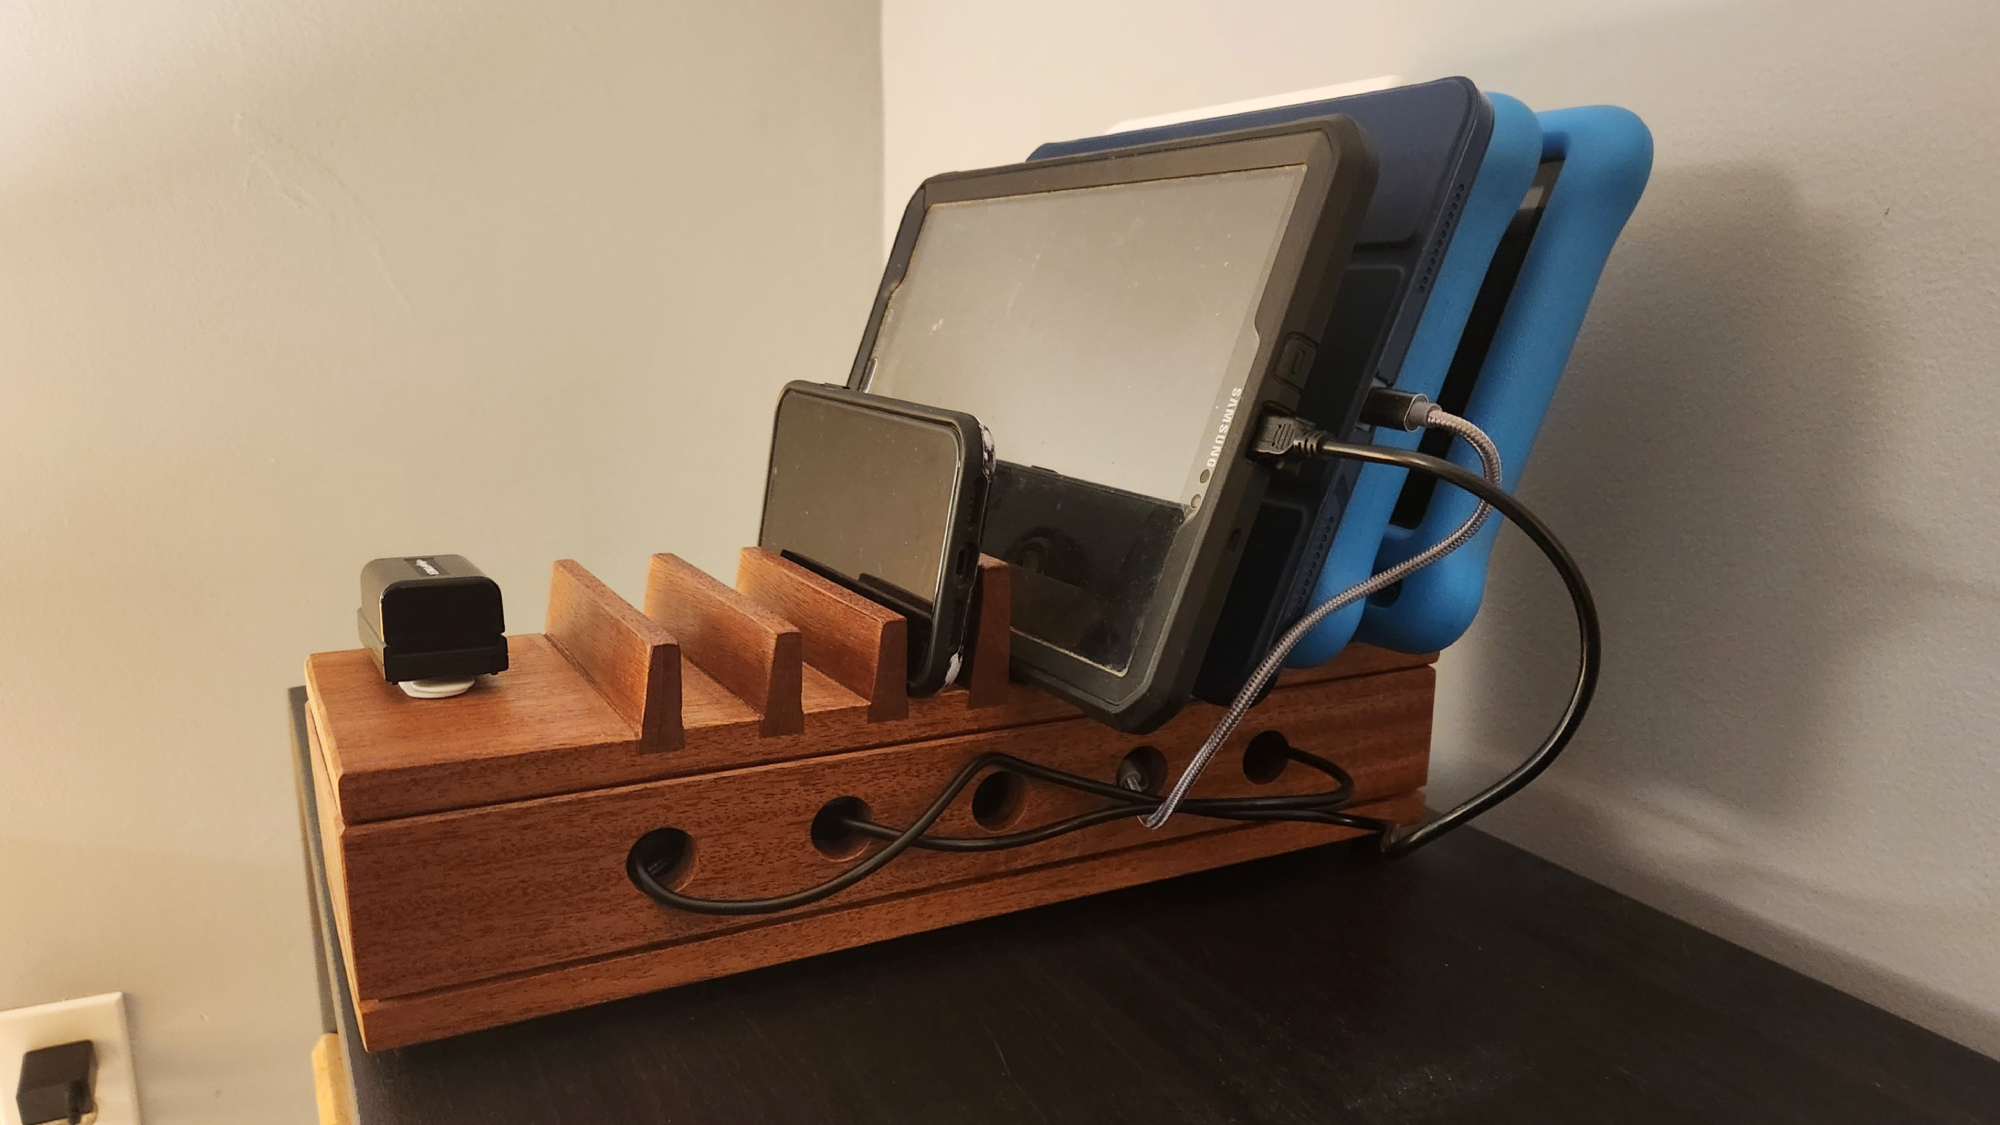 How to build a charging station for multiple devices